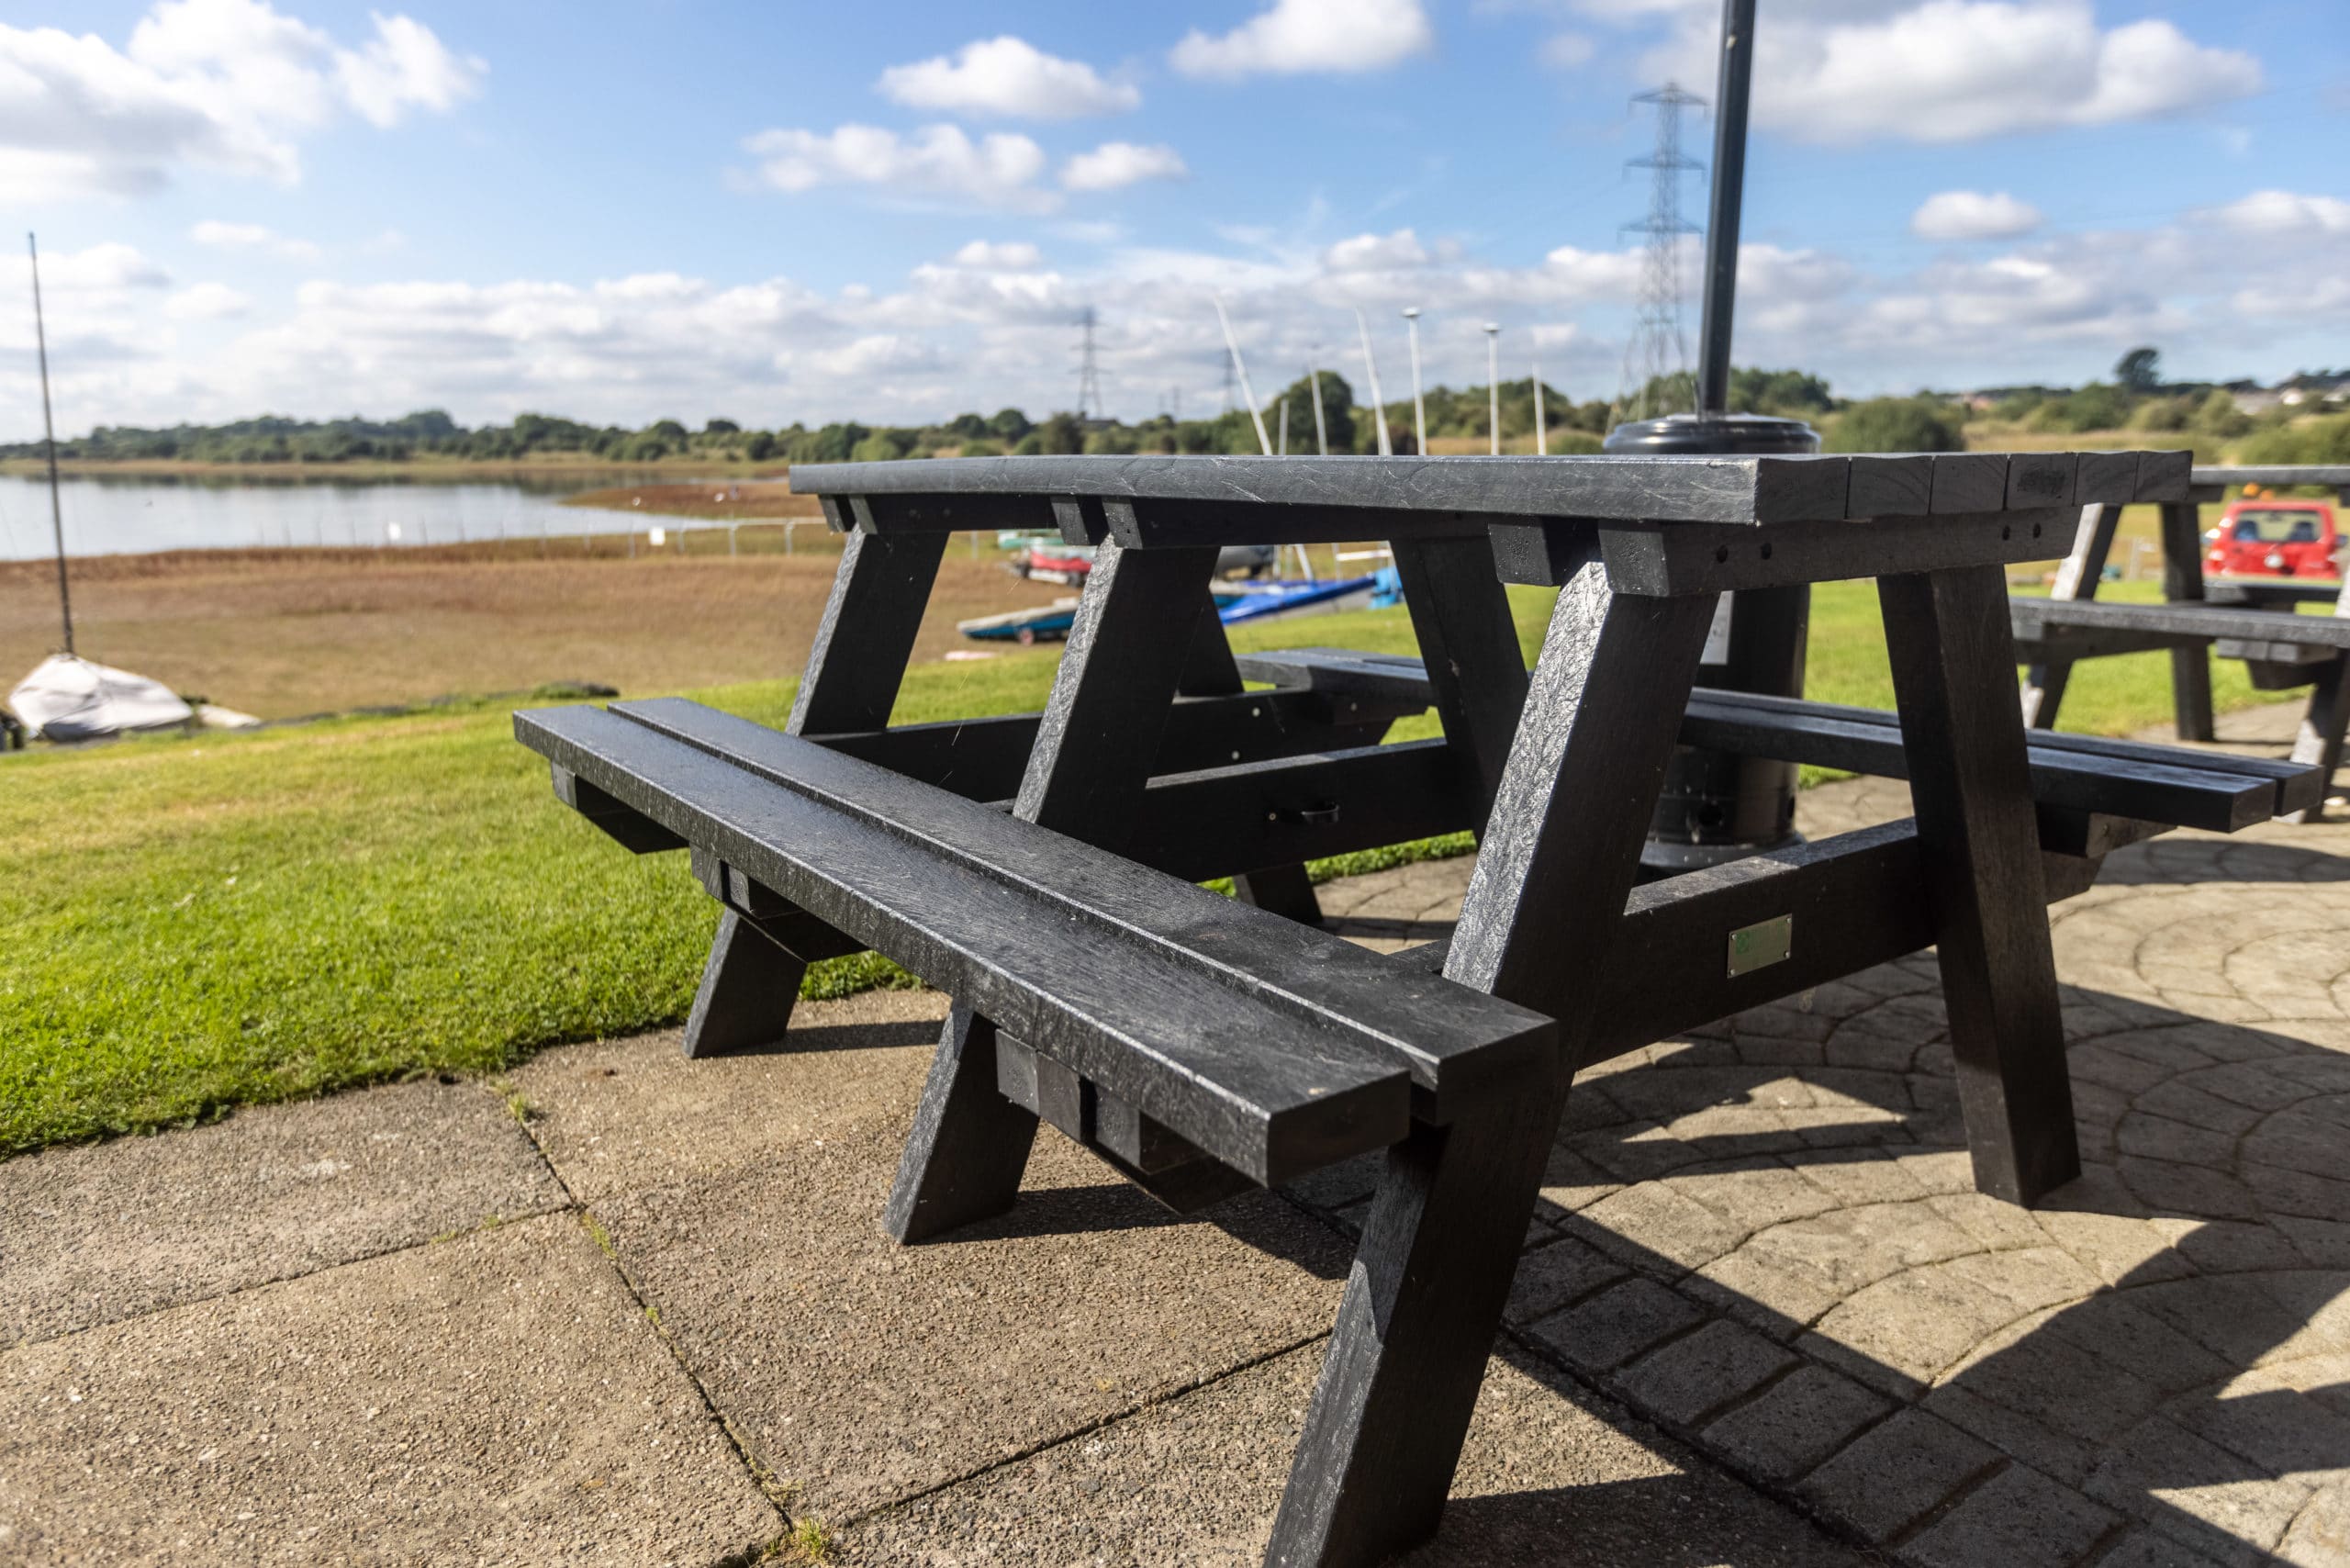 Denholme picnic tables, part of the 5 for 4 offer